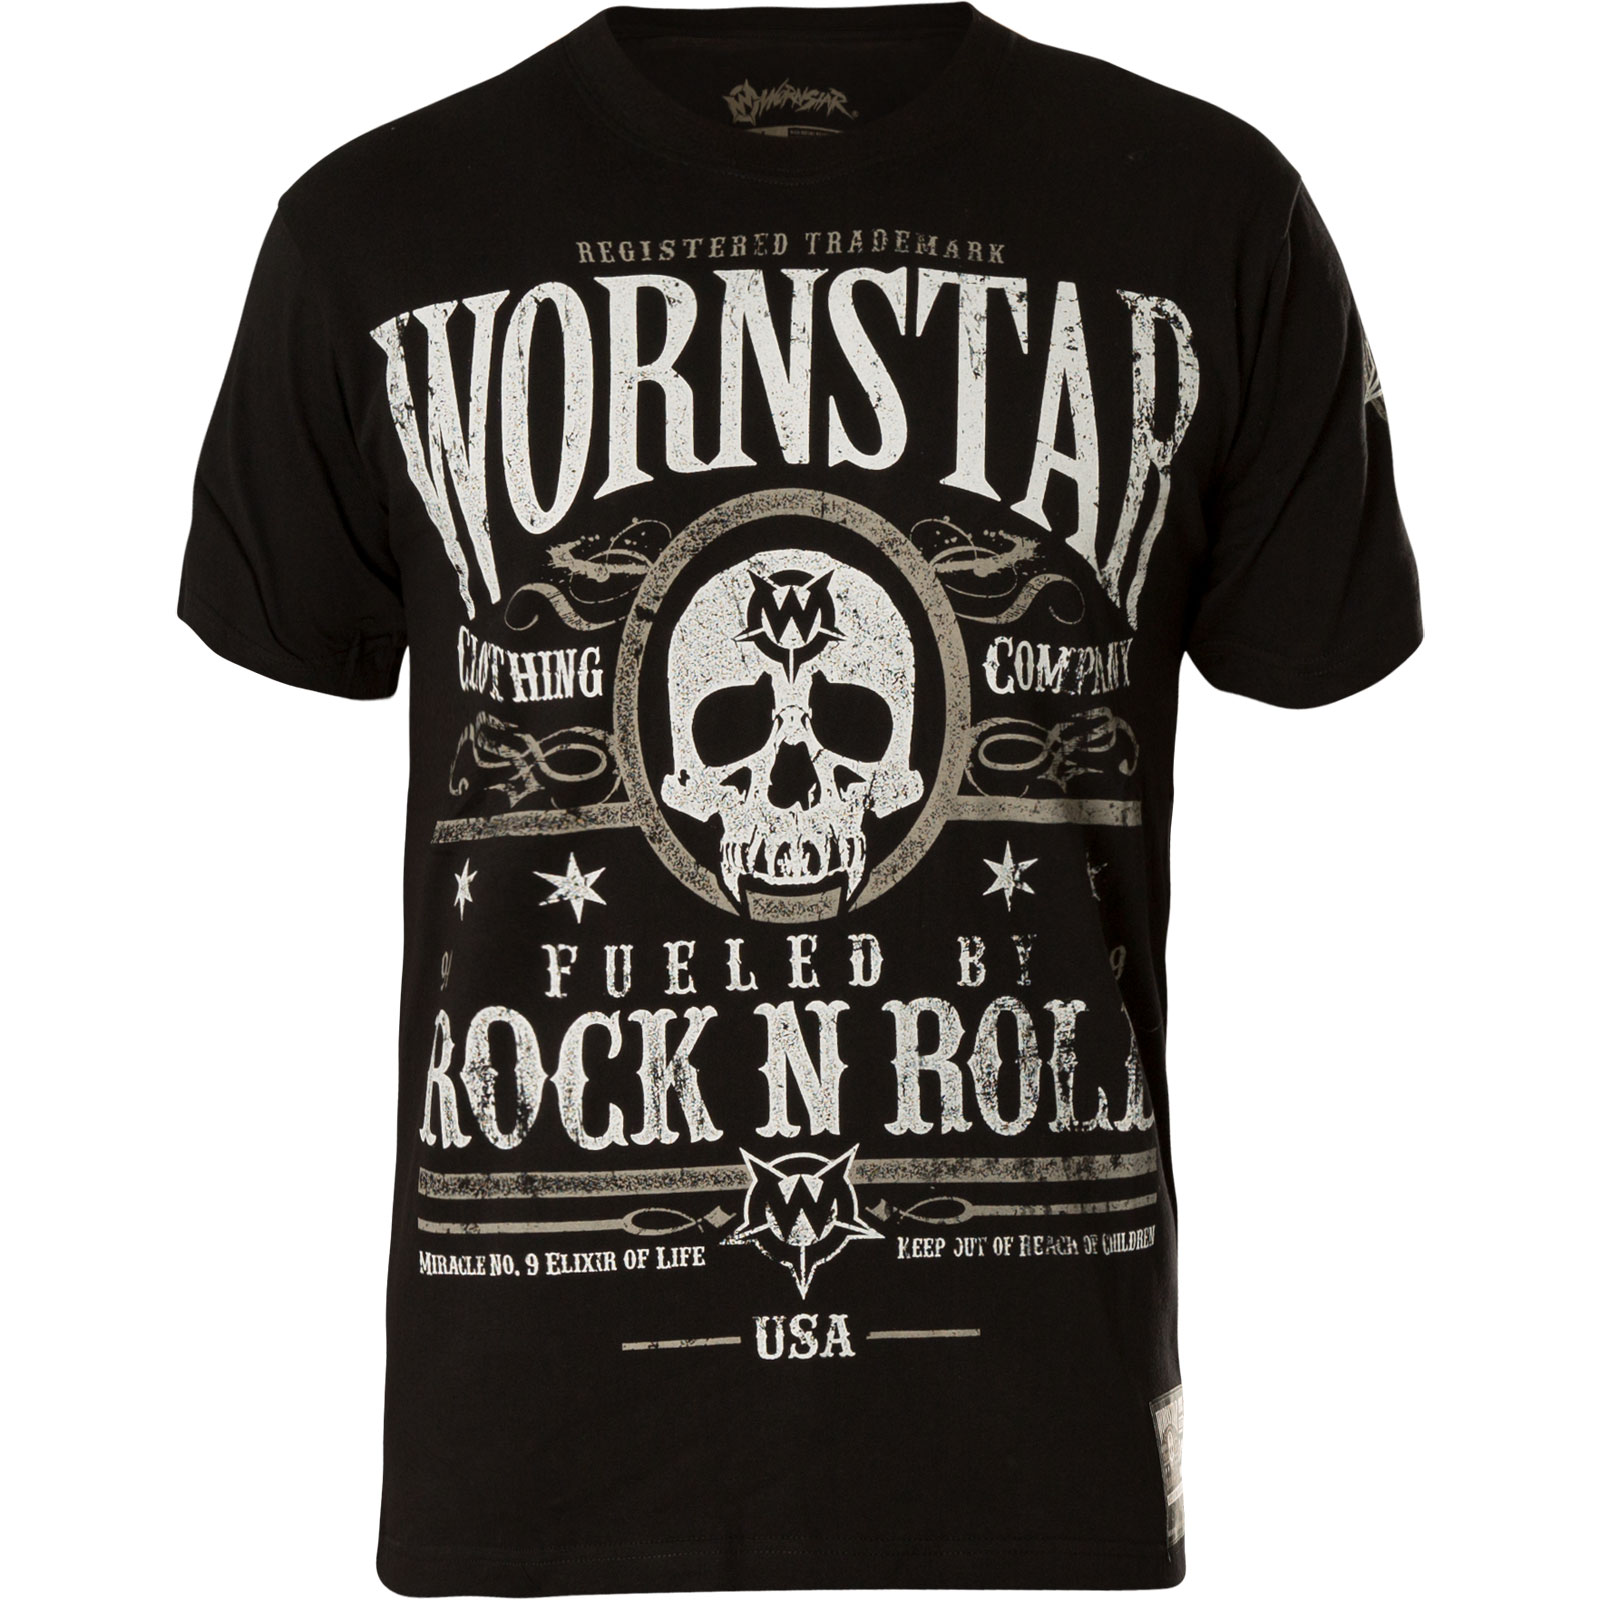 Wornstar T-Shirt Elixir in black with large graphic